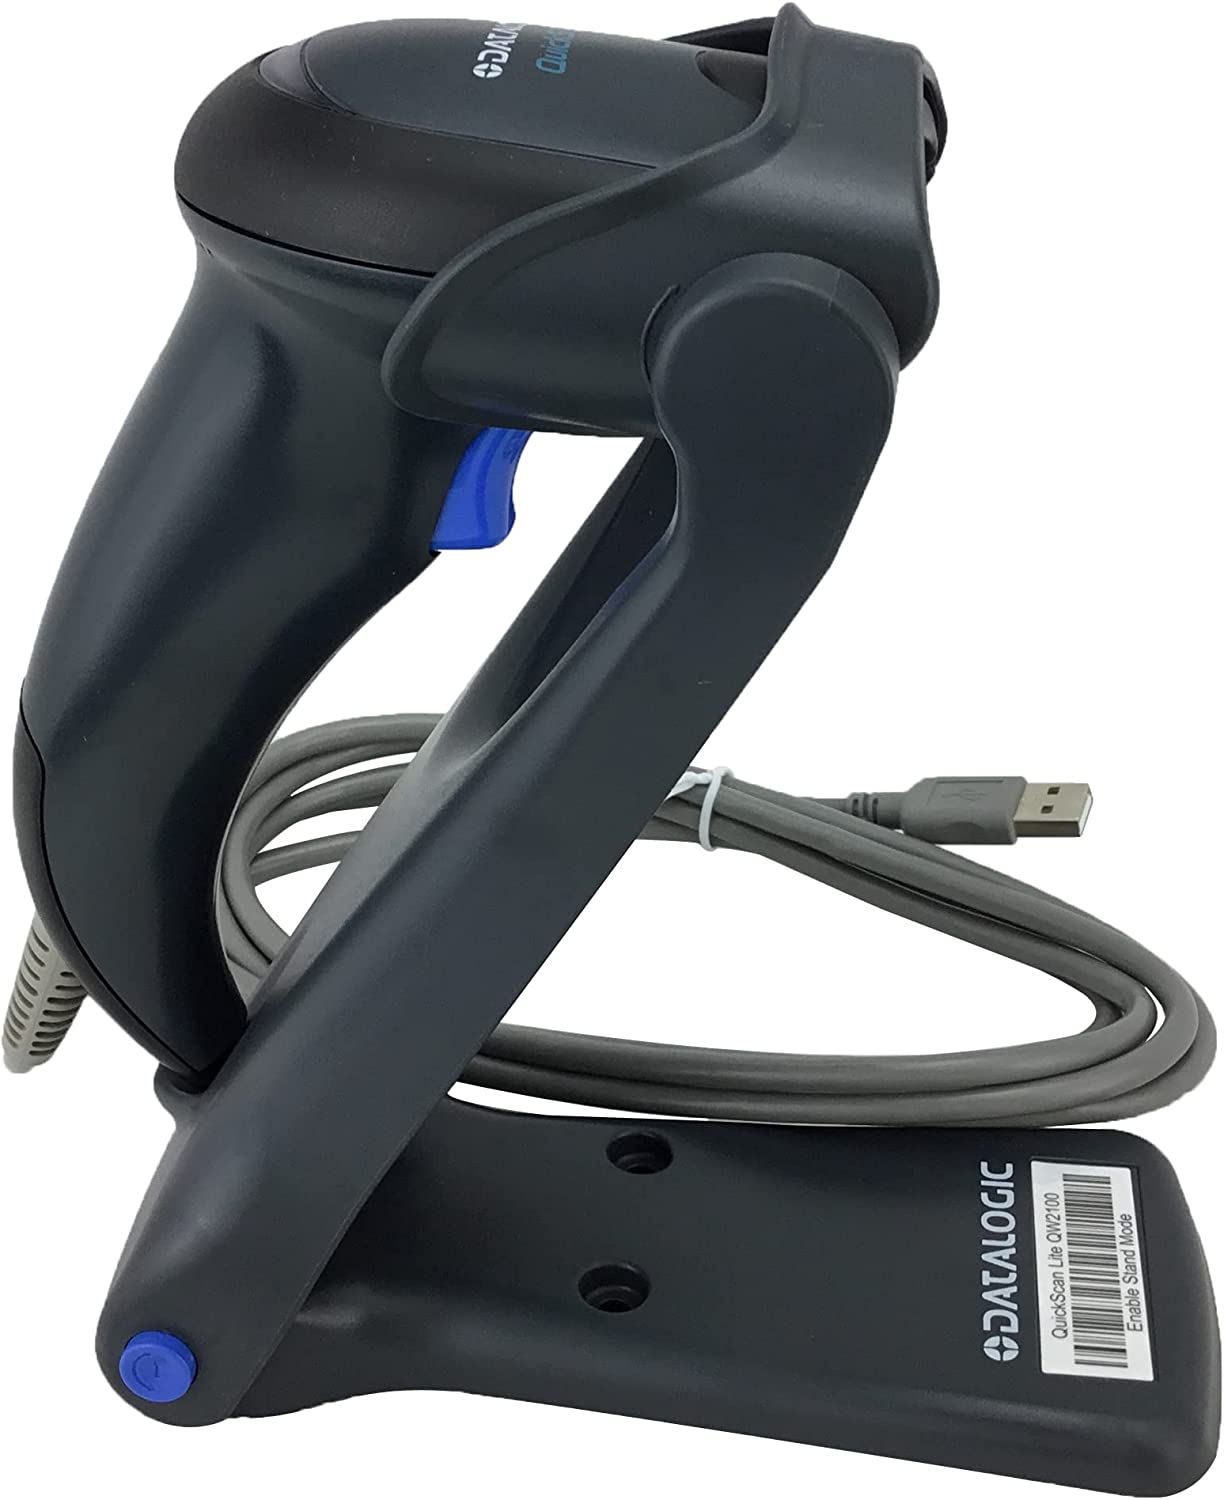 Datalogic QuickScan Lite QW2120 Handheld  Barcode Scanner/Linear Imager with USB Cable